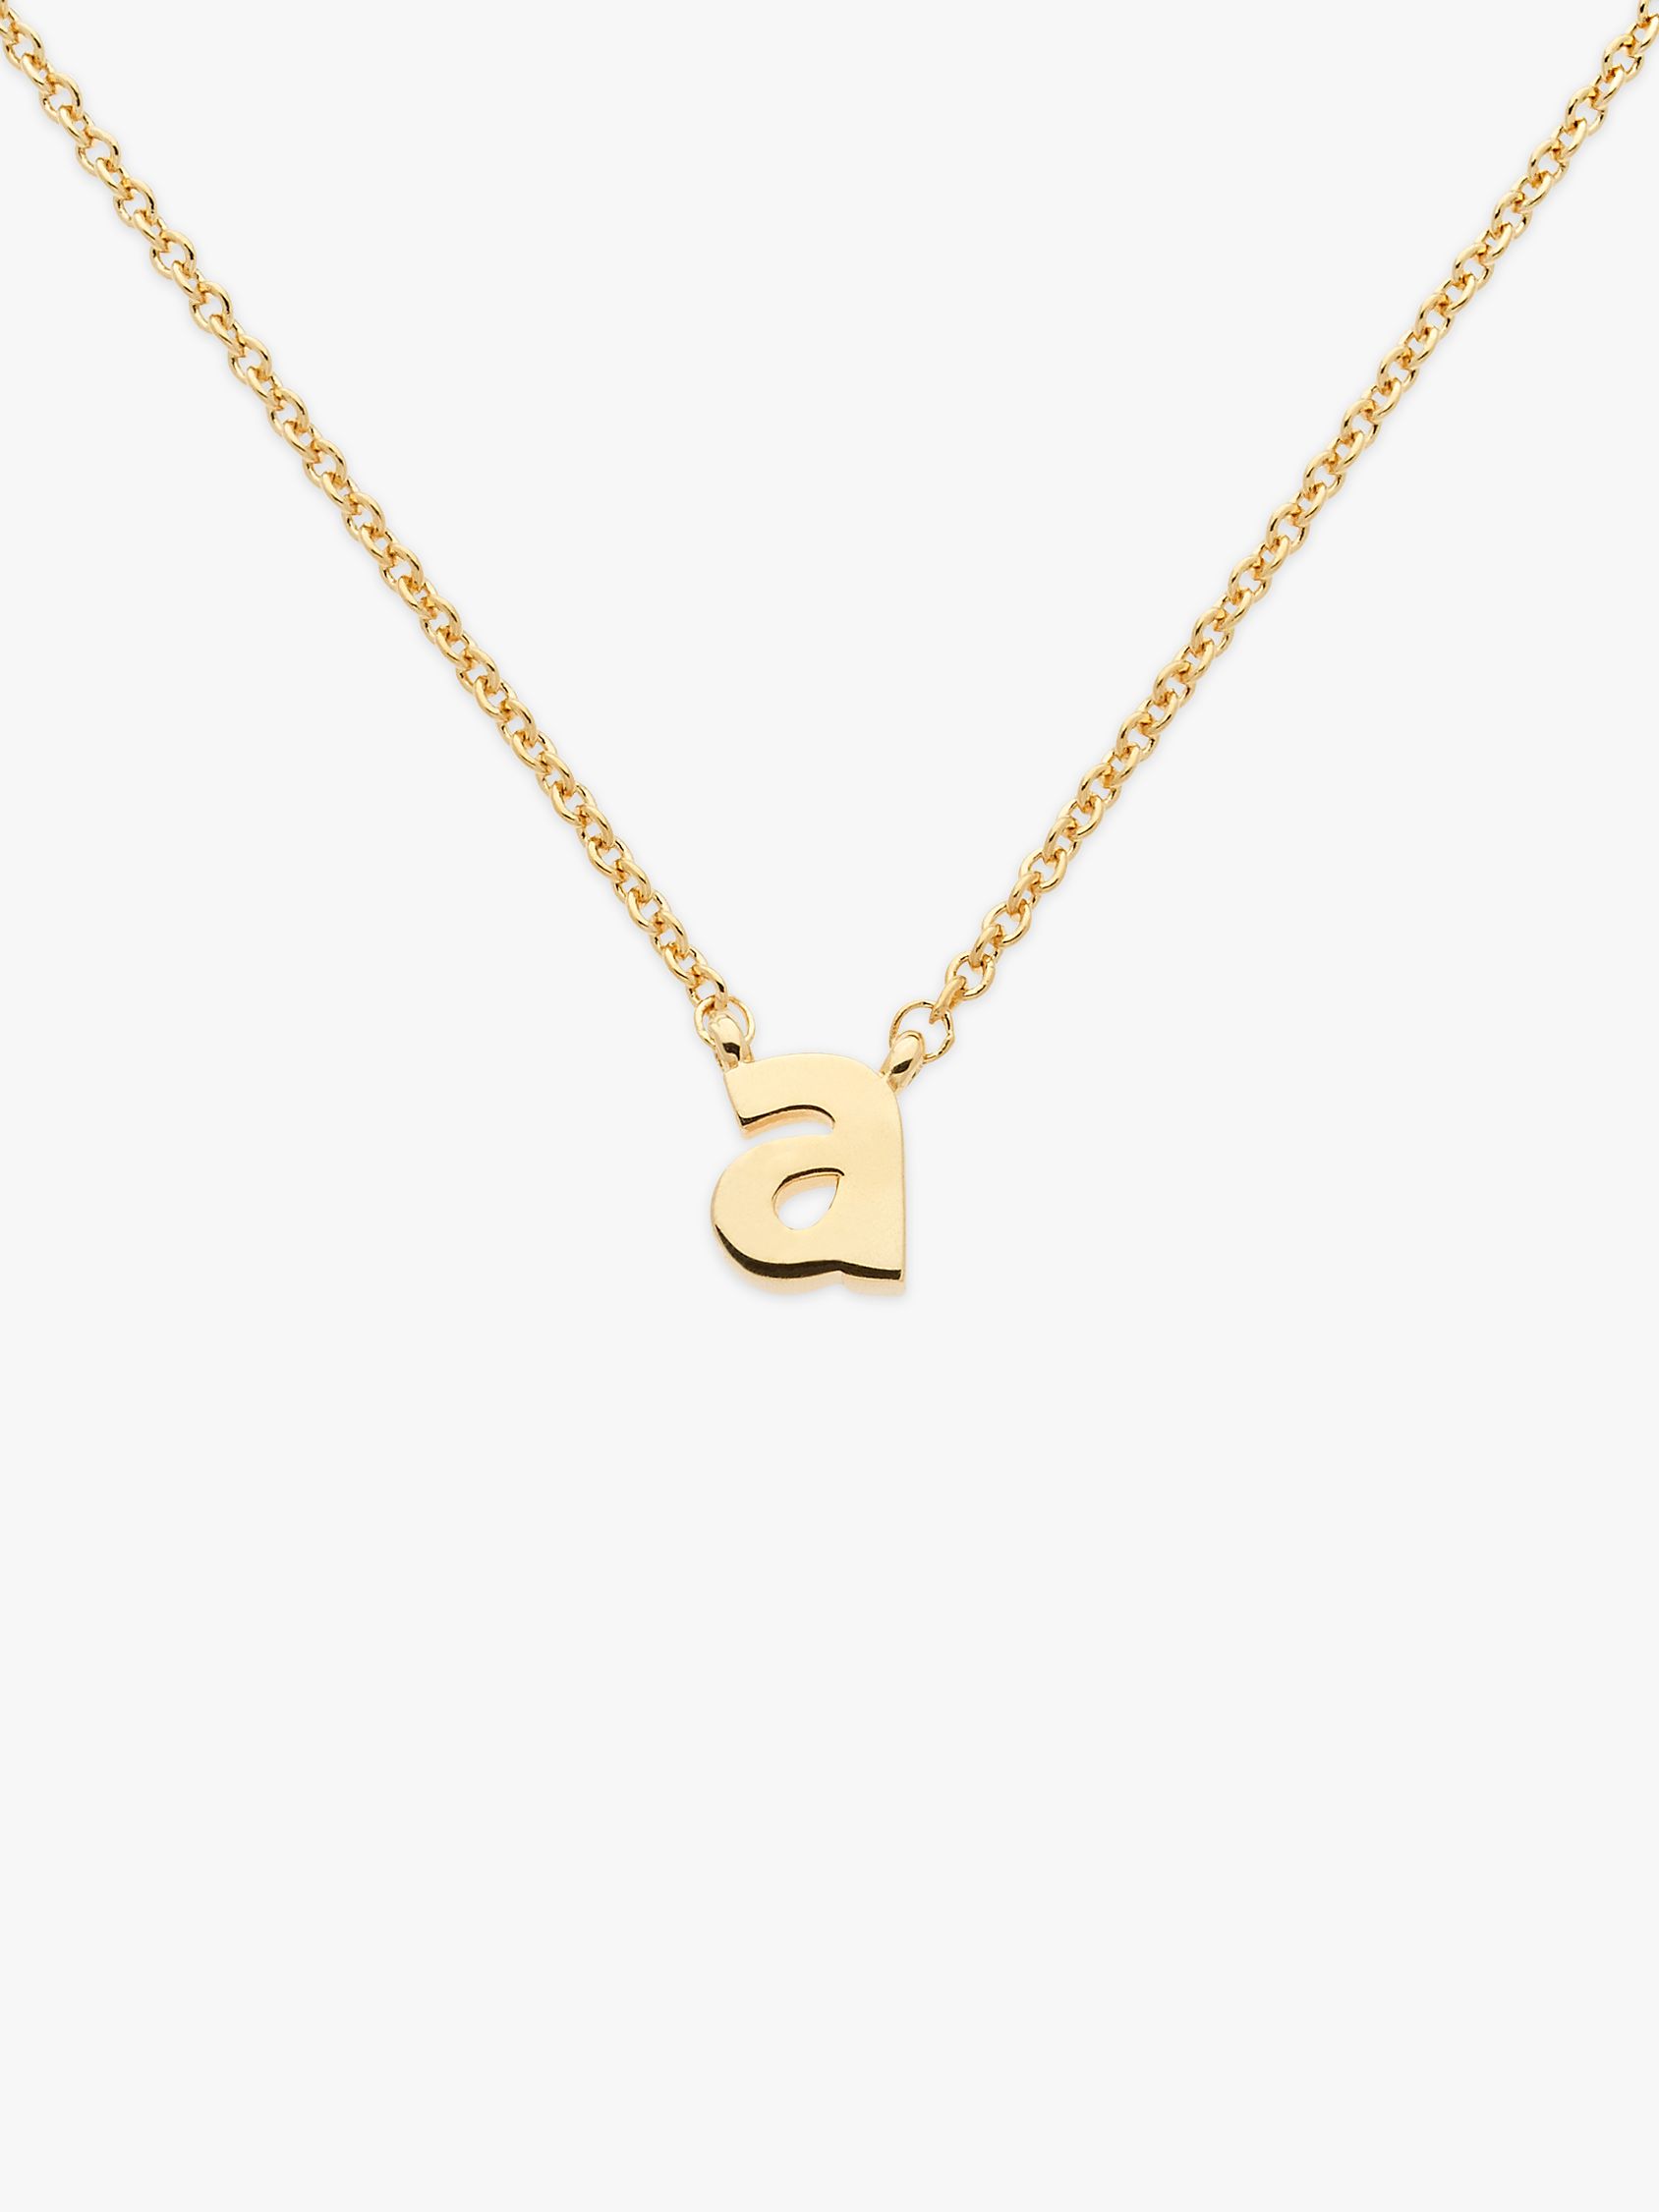 Melissa Odabash Gold Plated Initial Pendant Necklace, A